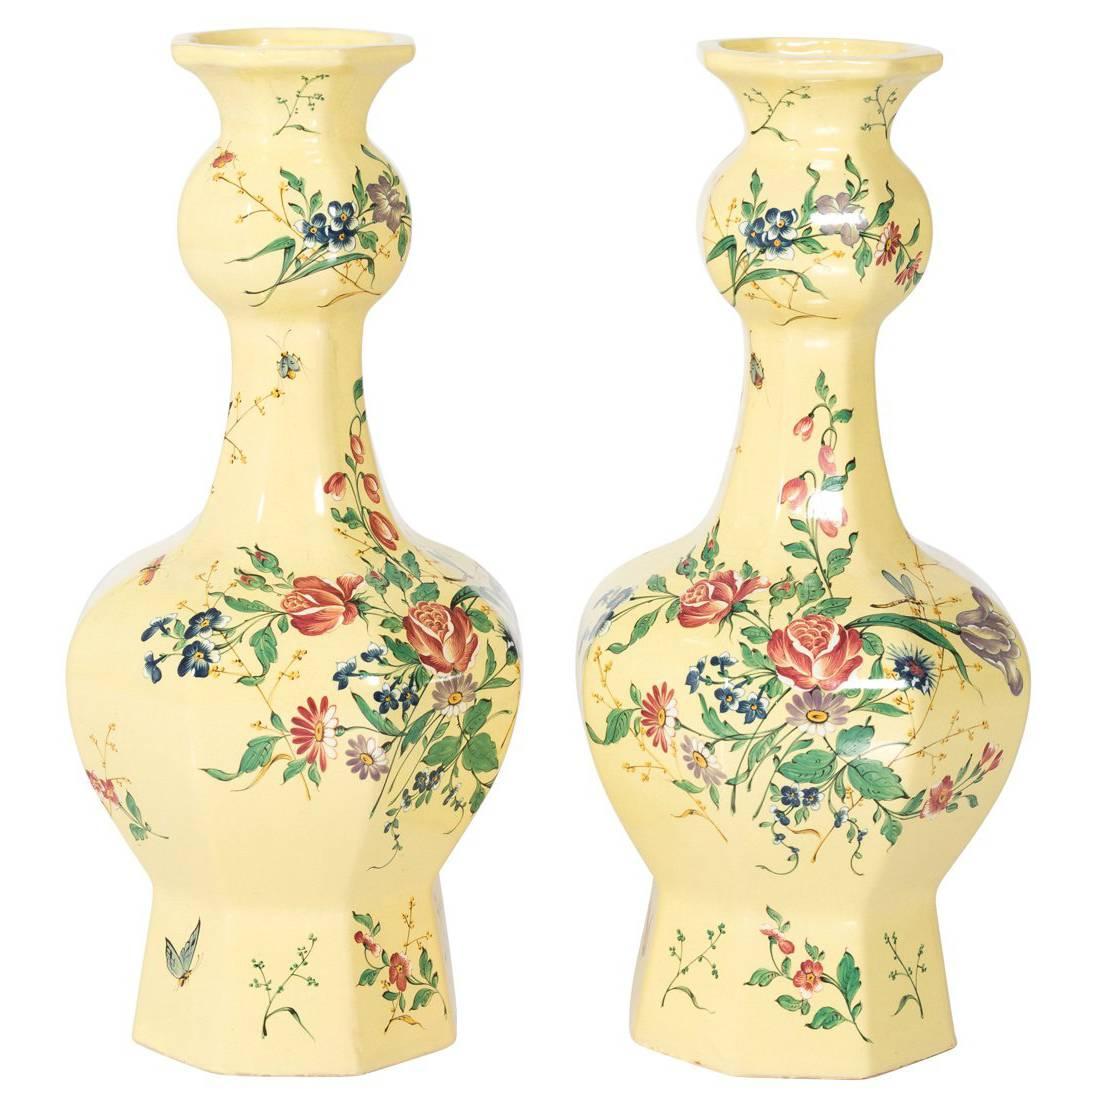 Pair of French Faience Vases